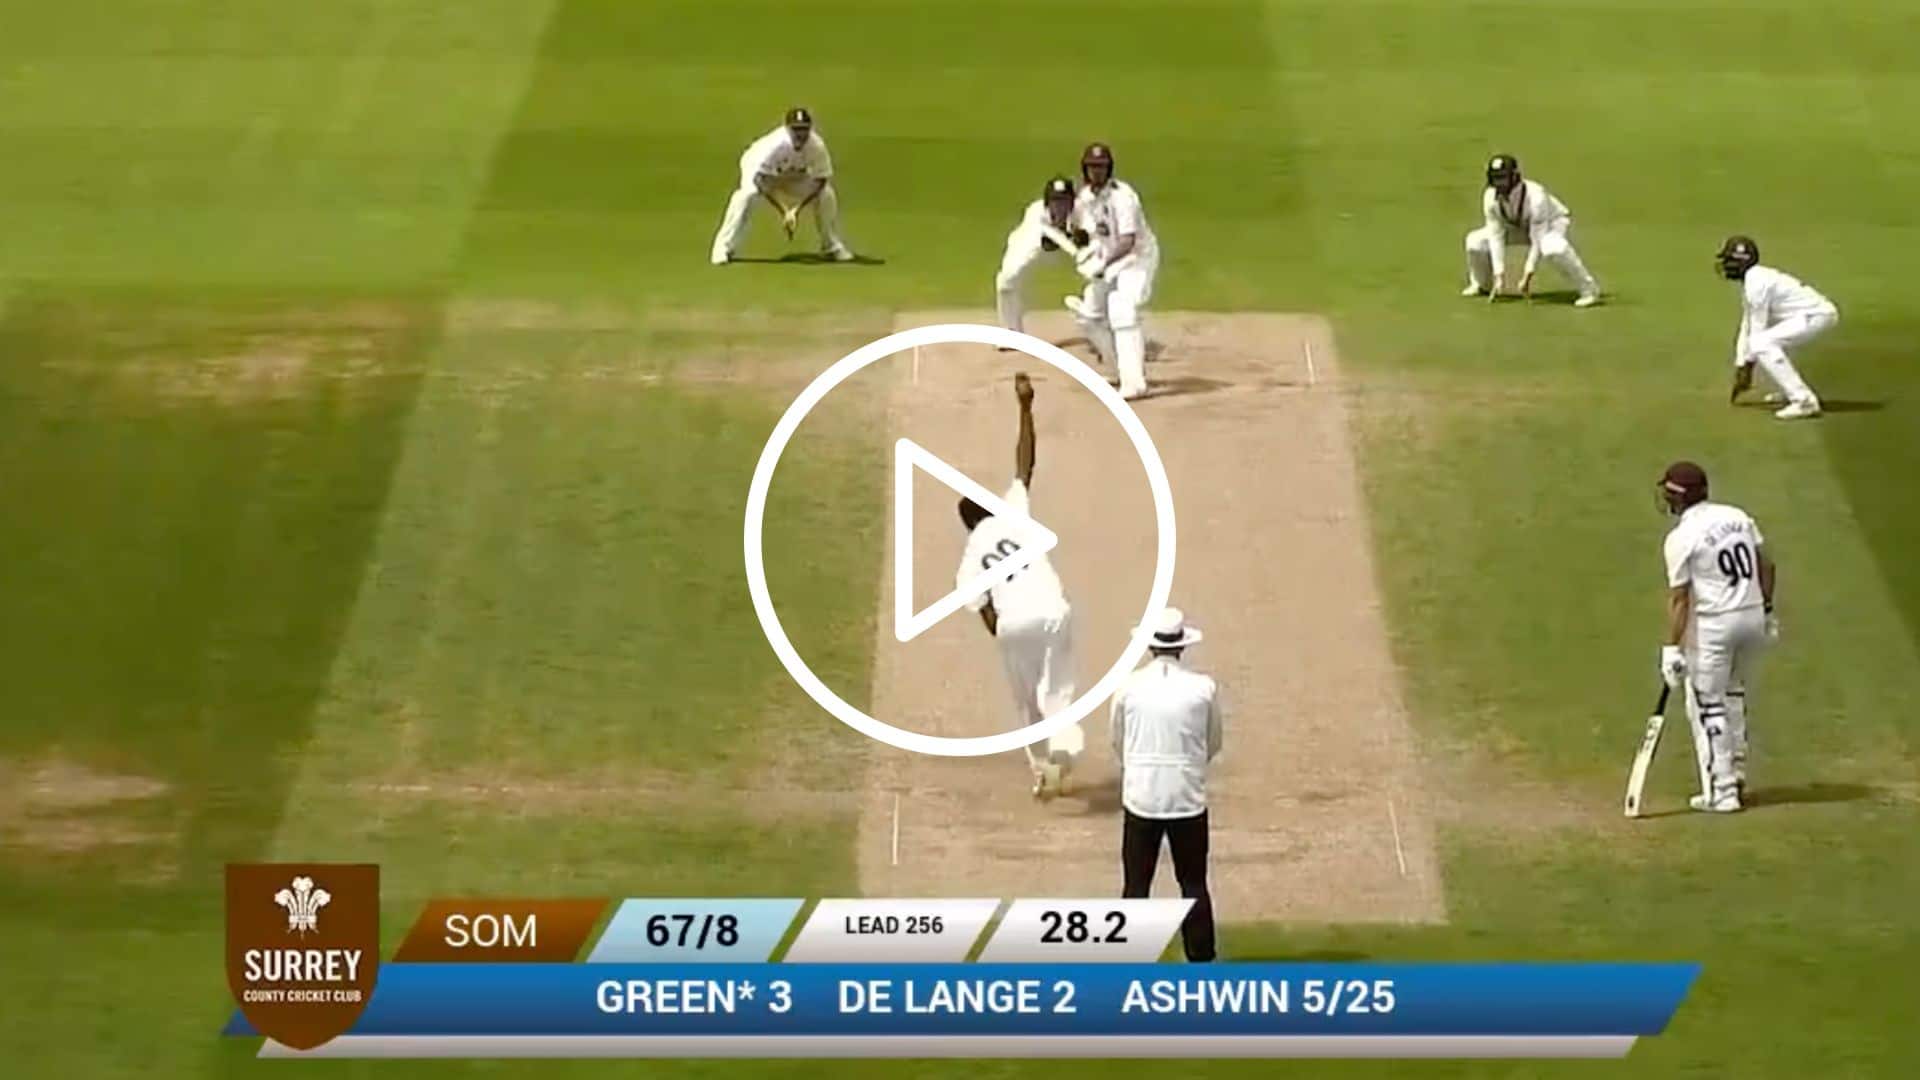 [Watch] Ashwin's Old Video Of A Six-fer at The Oval Goes Viral After Indian Bowlers Leak Runs on Day 1